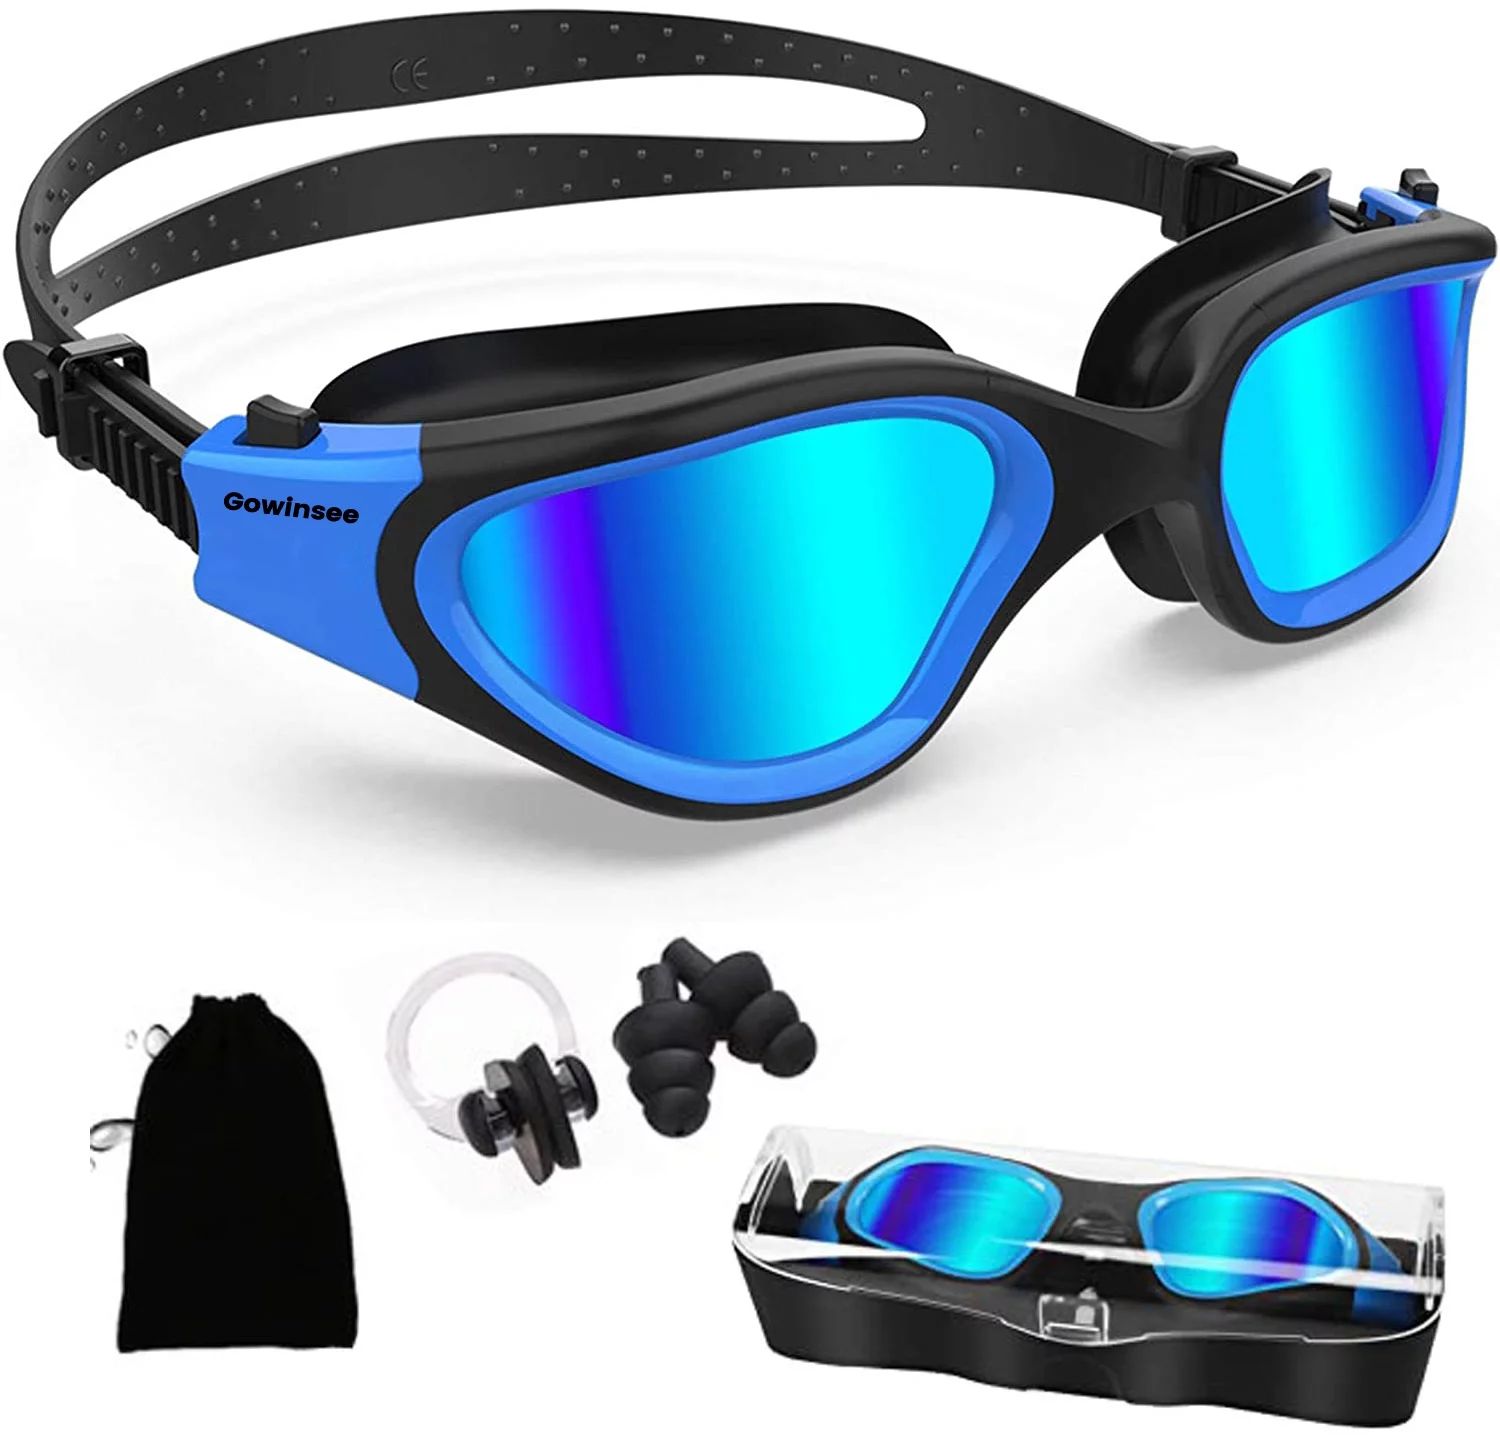 Gowinsee Swim Goggles, Comfortable Polarized Anti-Fog Swimming Goggles for Adult | Walmart (US)